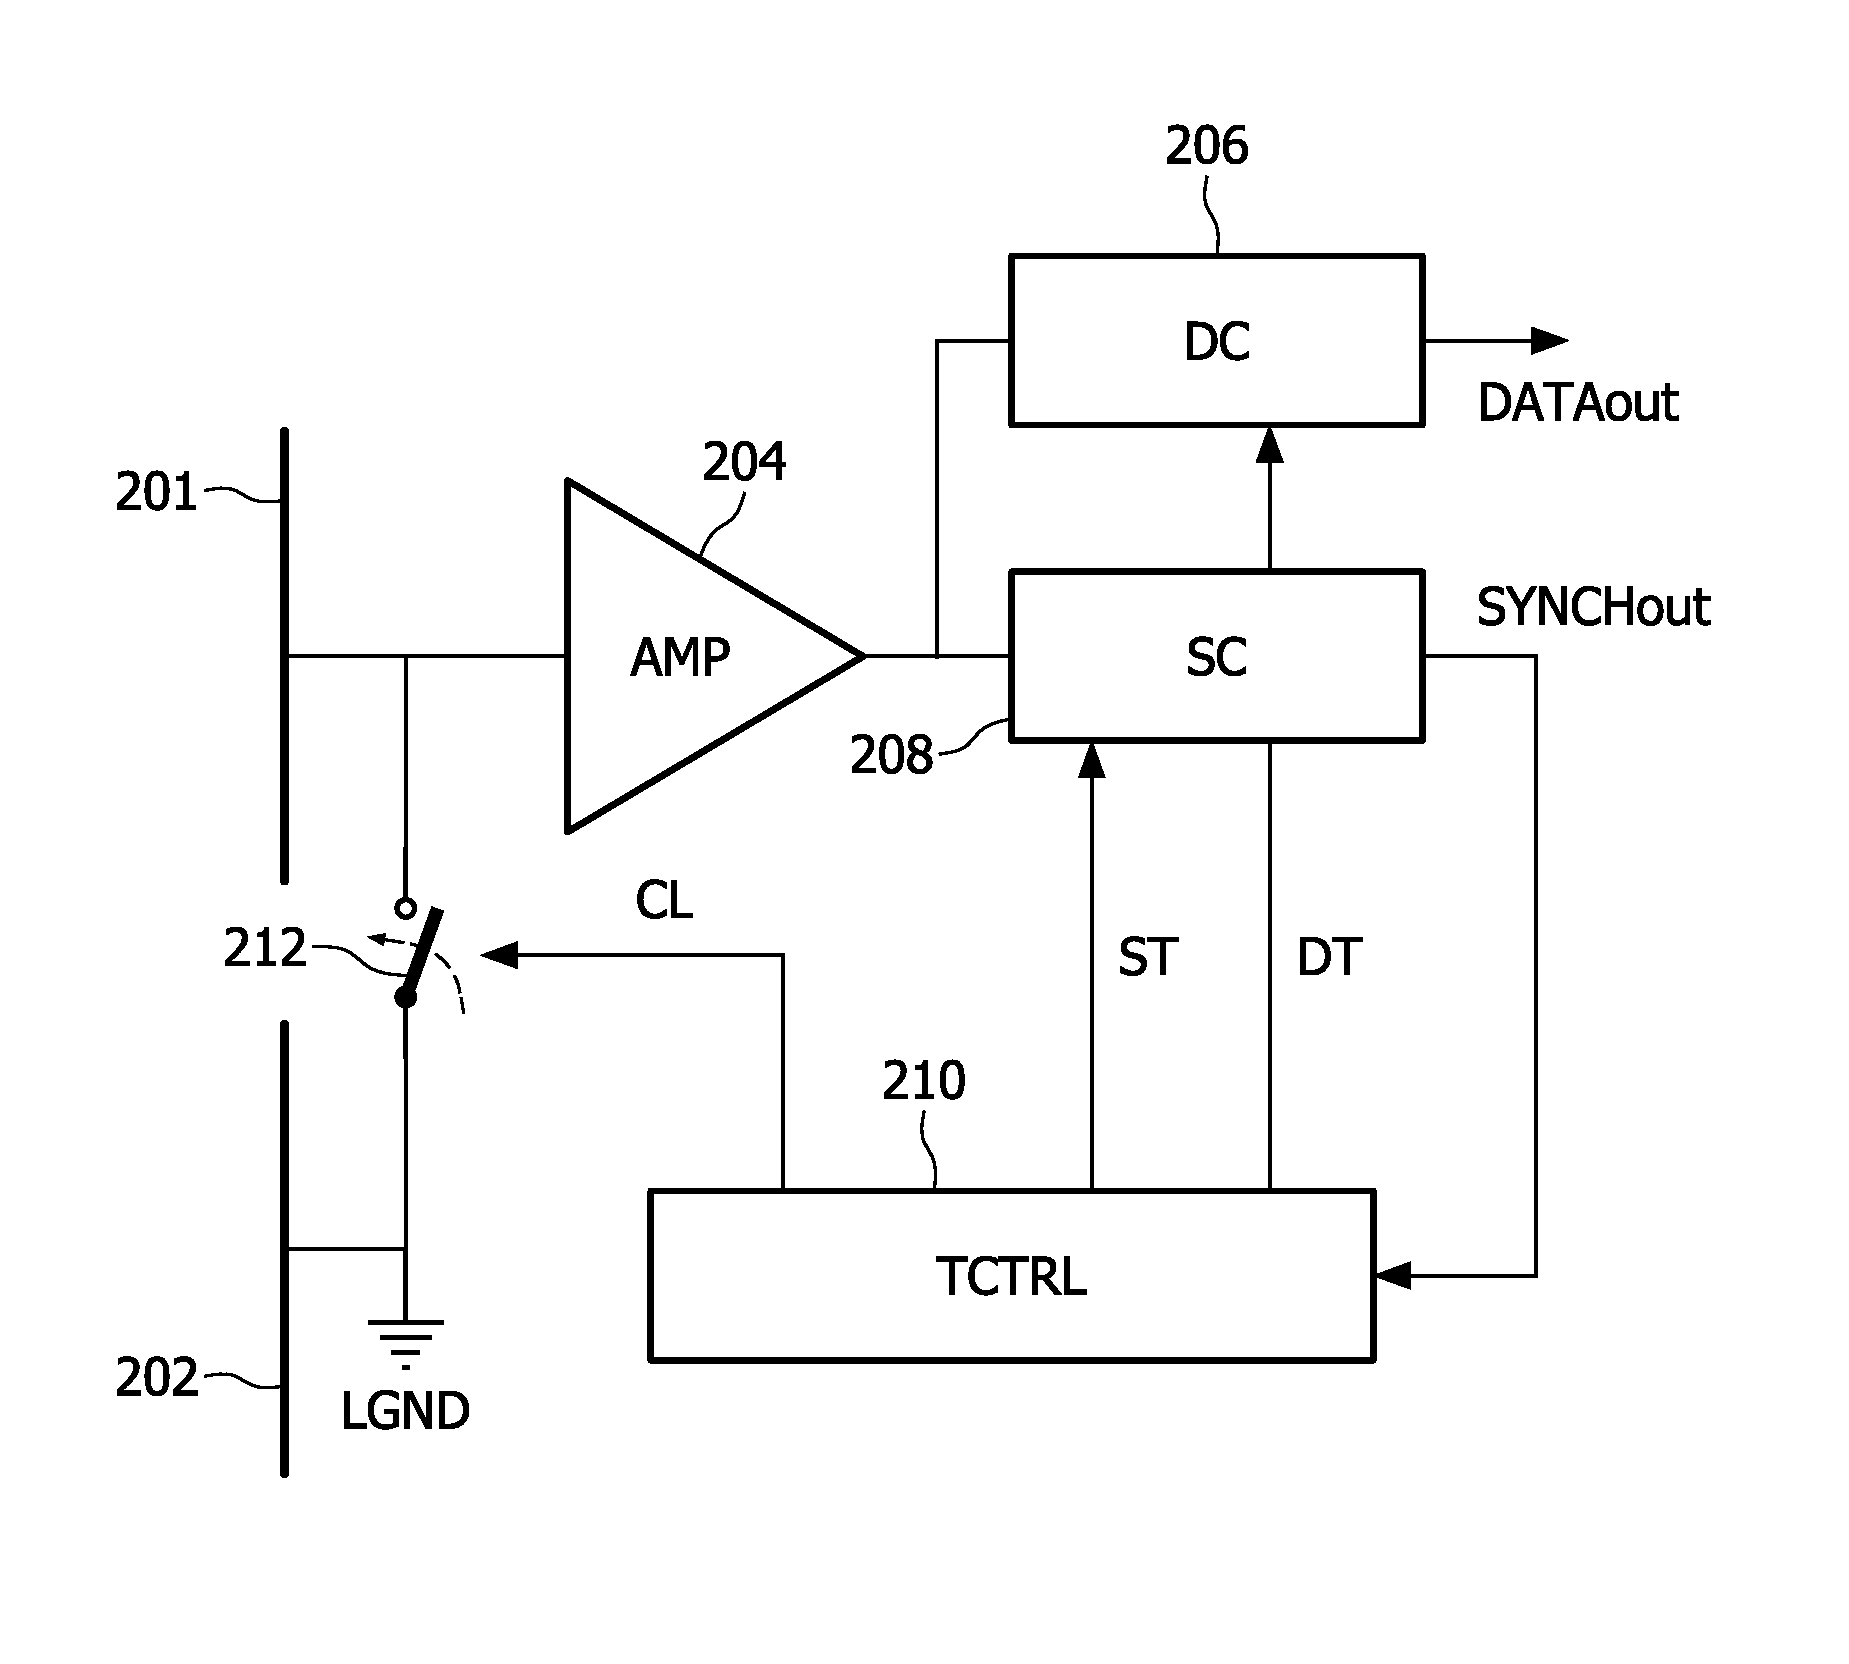 Wideband communication for body-coupled communication systems